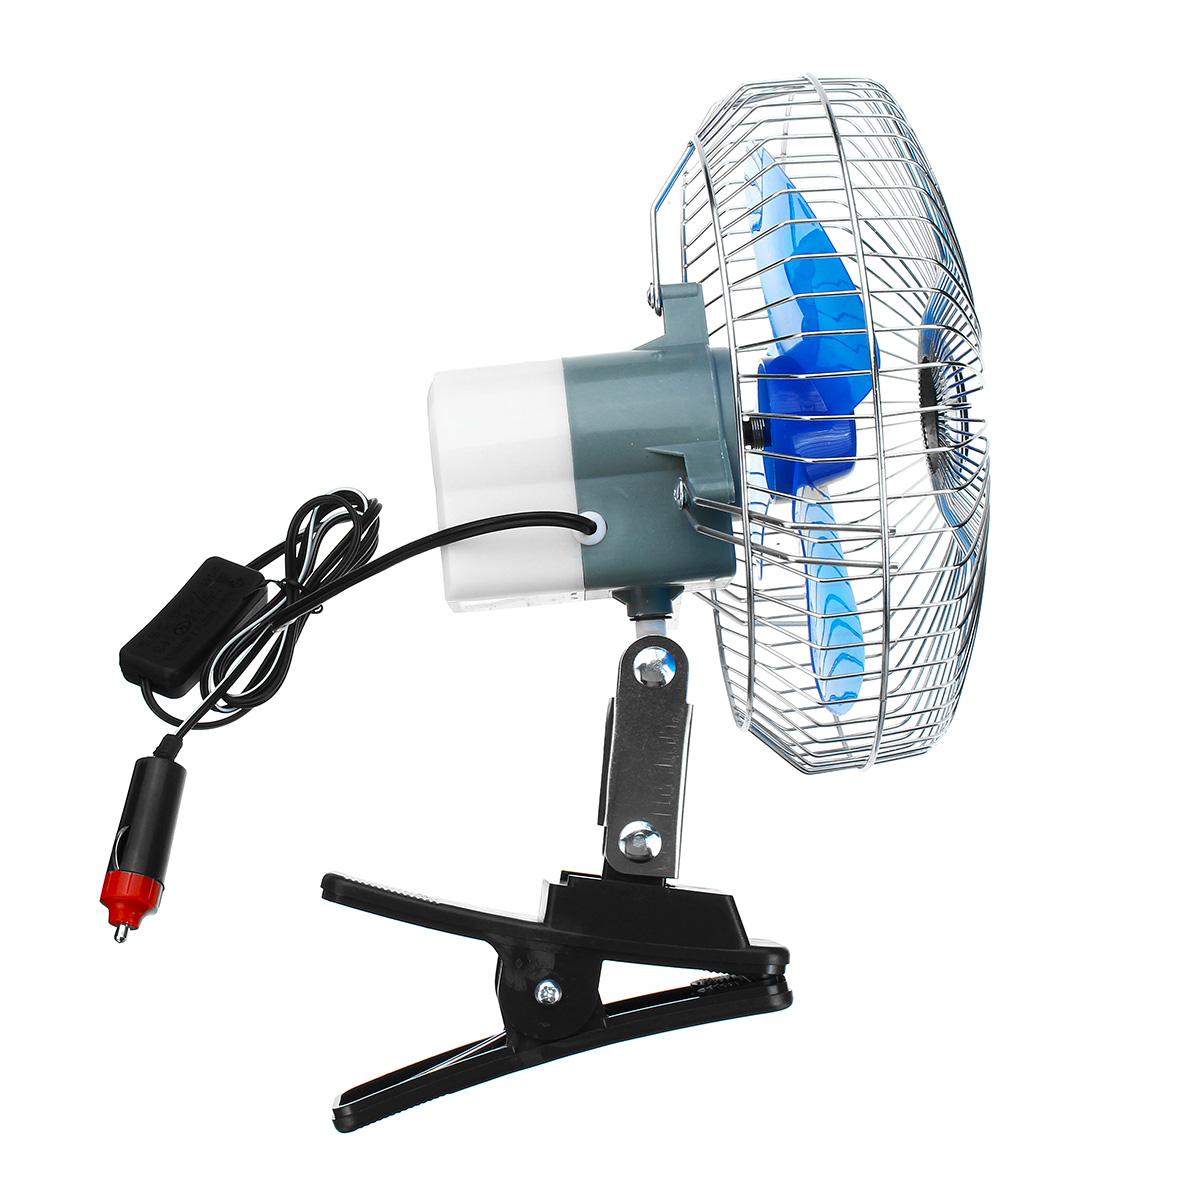 8 Inch 12V Portable Vehicle Auto Car Fan Oscillating Car Auto Clip-On Cooling Fan